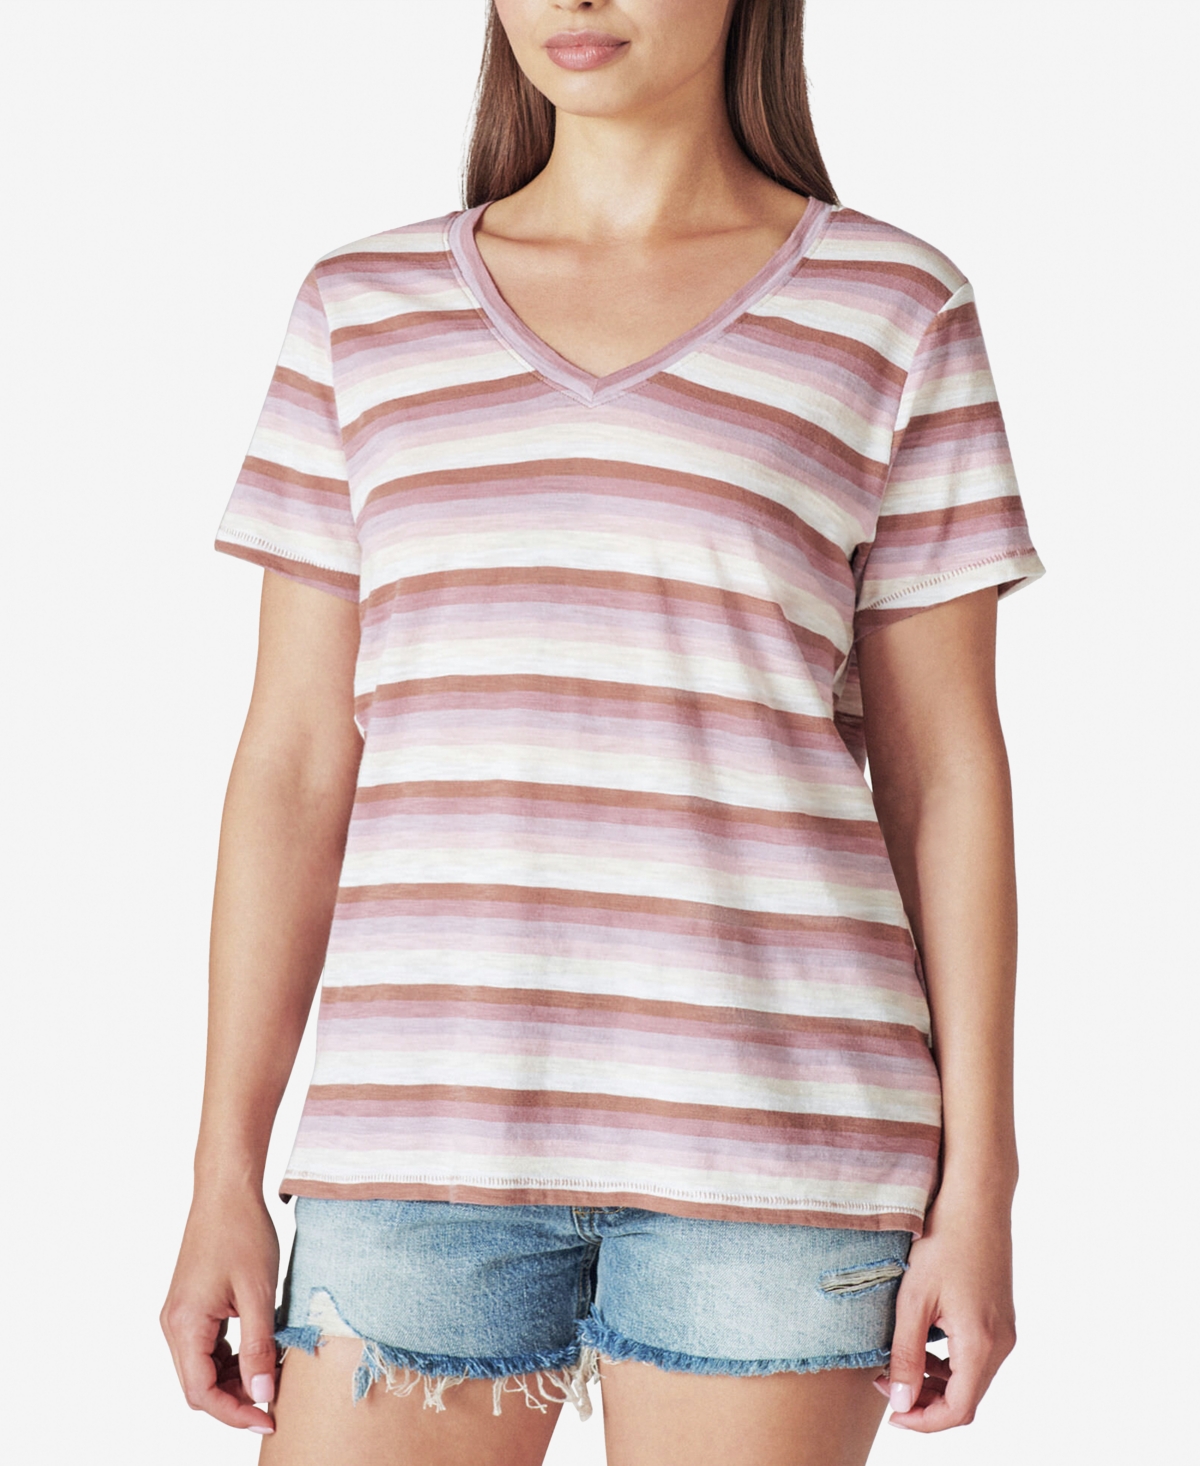 LUCKY BRAND WOMEN'S CLASSIC STRIPED V-NECK TOP